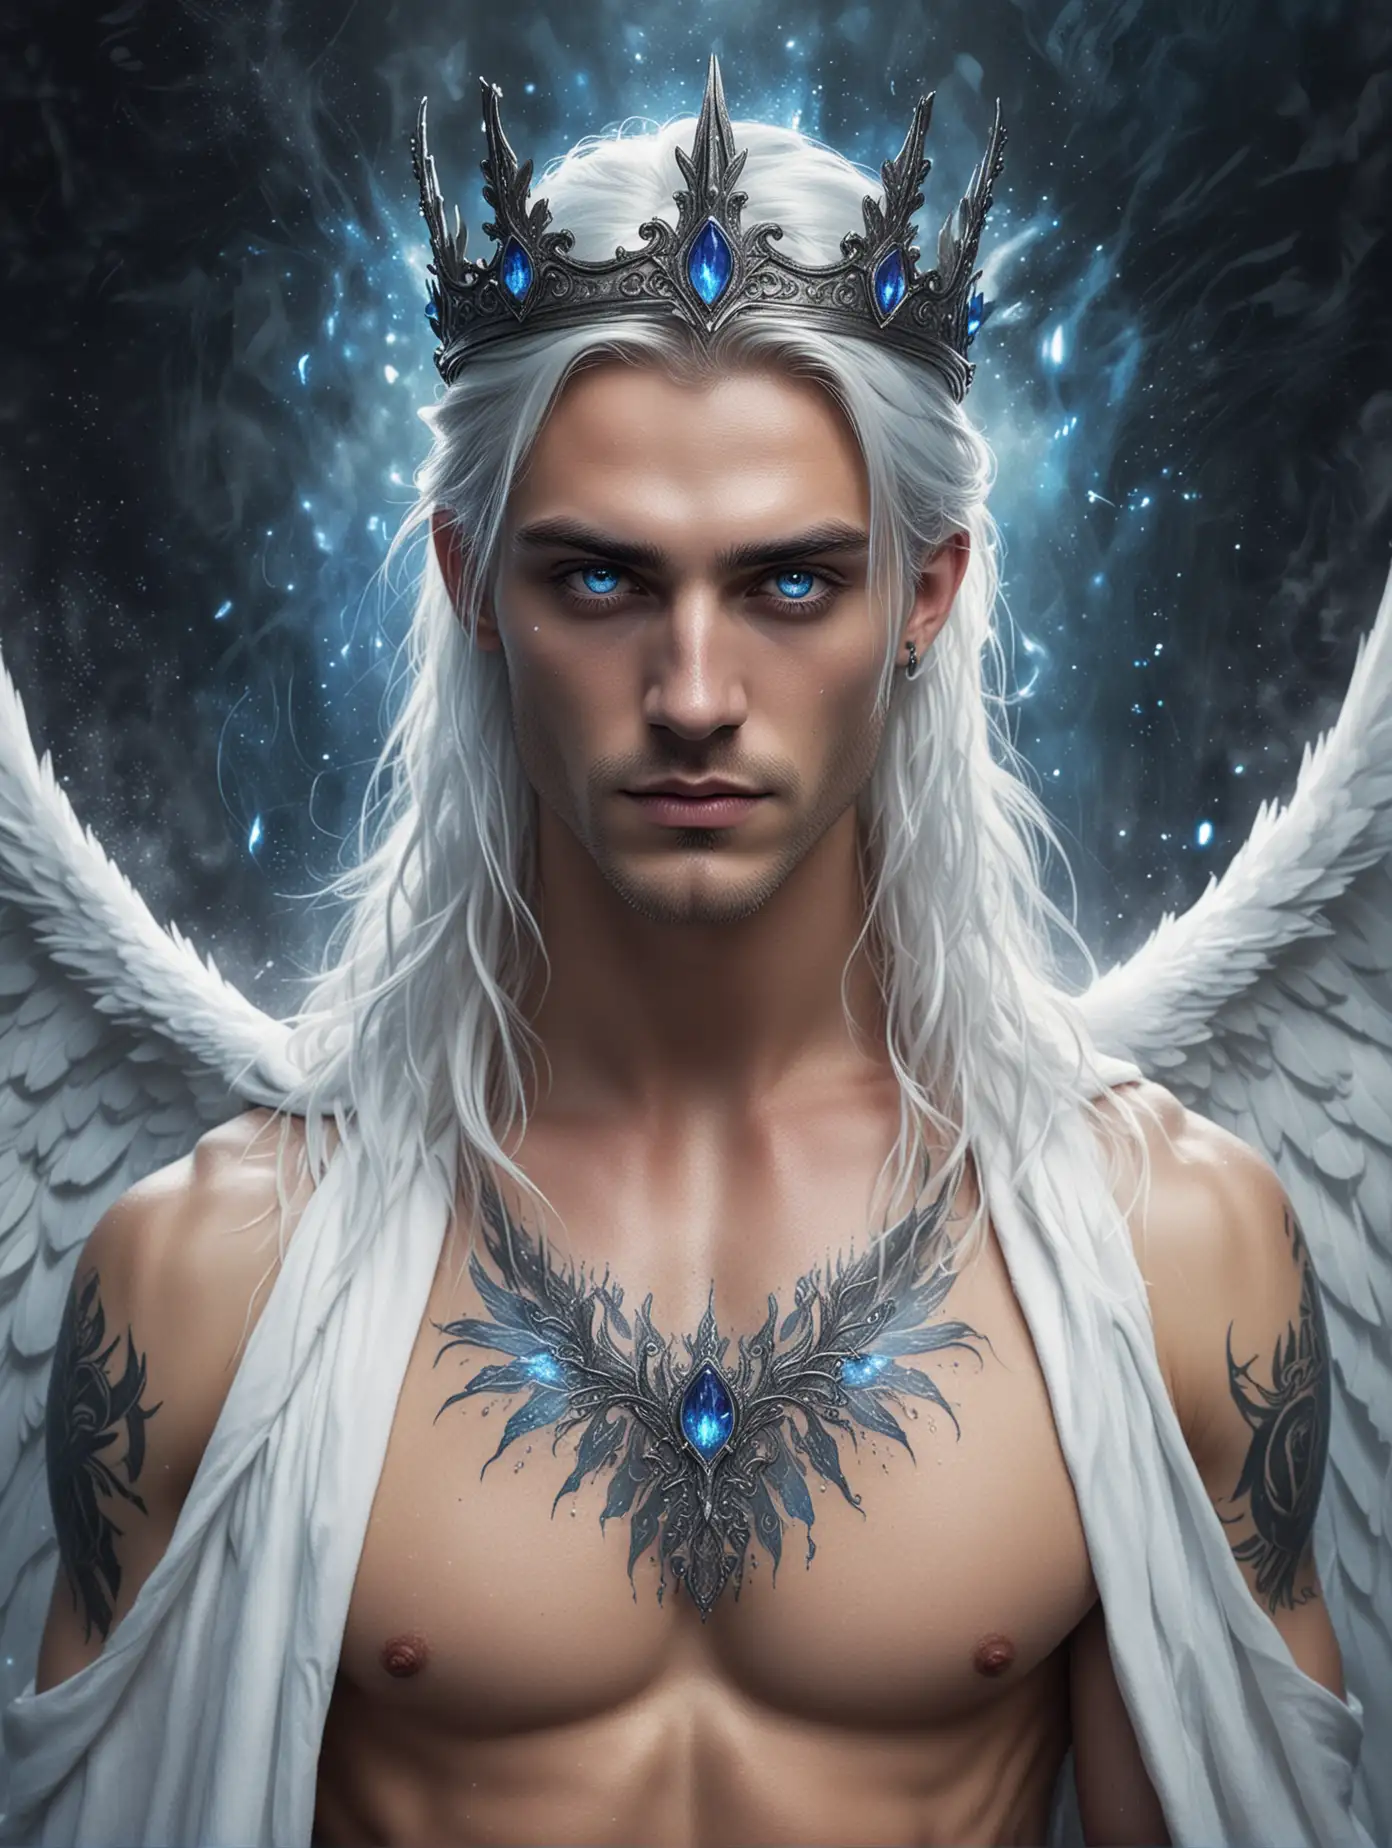 Illustration of a very handsome and sexy shirtless rugged fierce fae king with crown, white regal cloak, pointy ears, blue piercing eyes, tattoos, long hair,  iridescent gossamer fairy wings, blue fog, sparks, portrait 